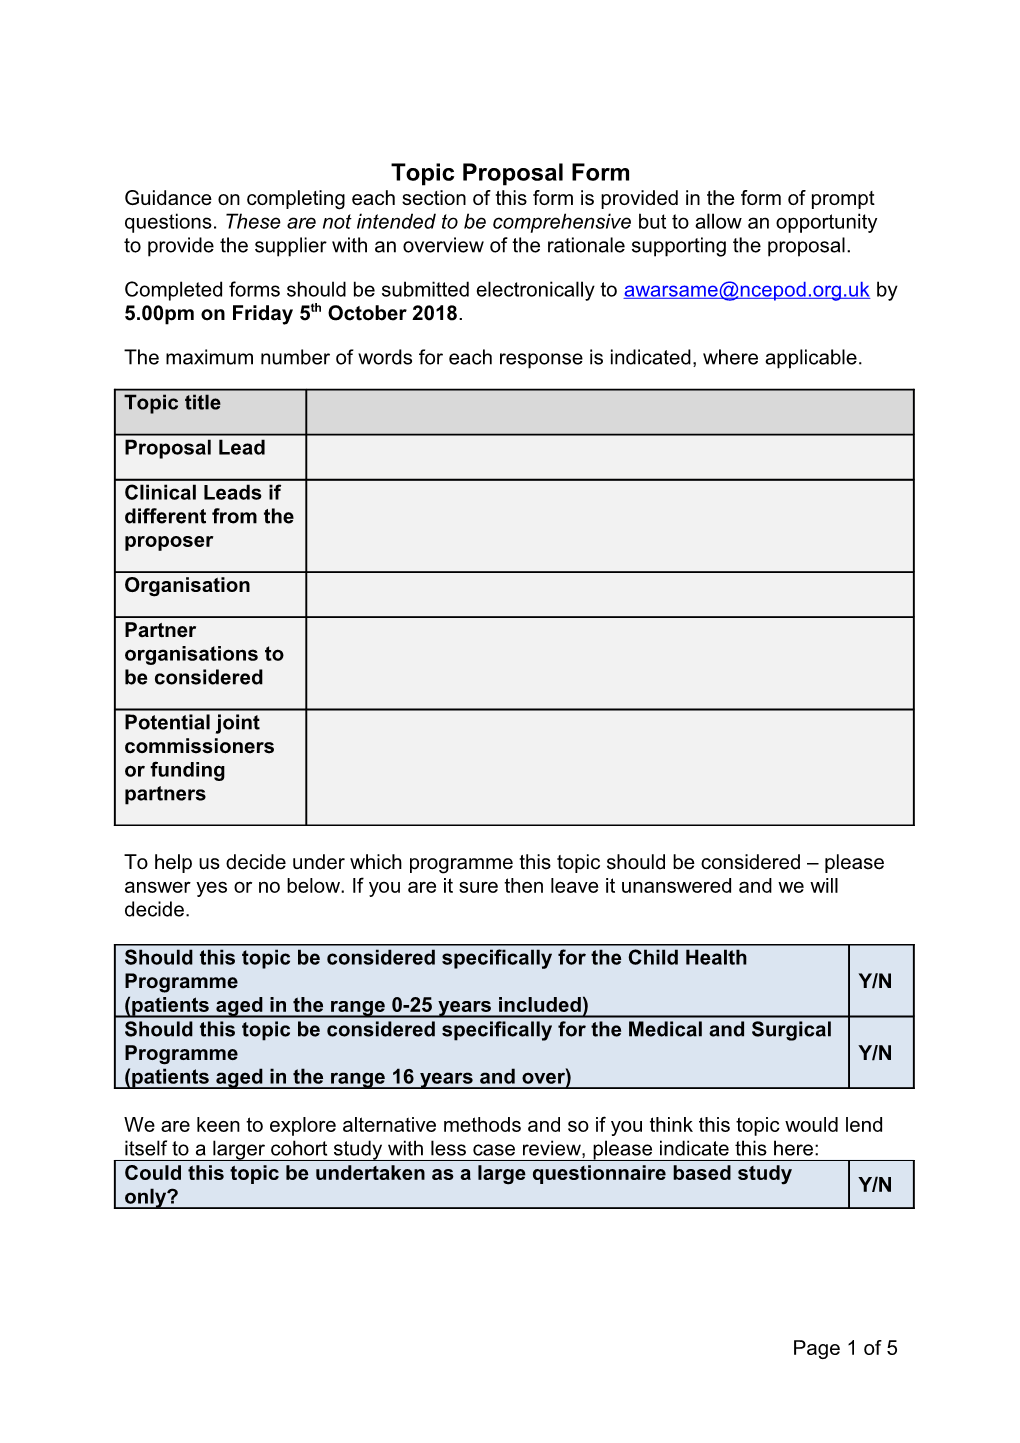 Topic Proposal Form